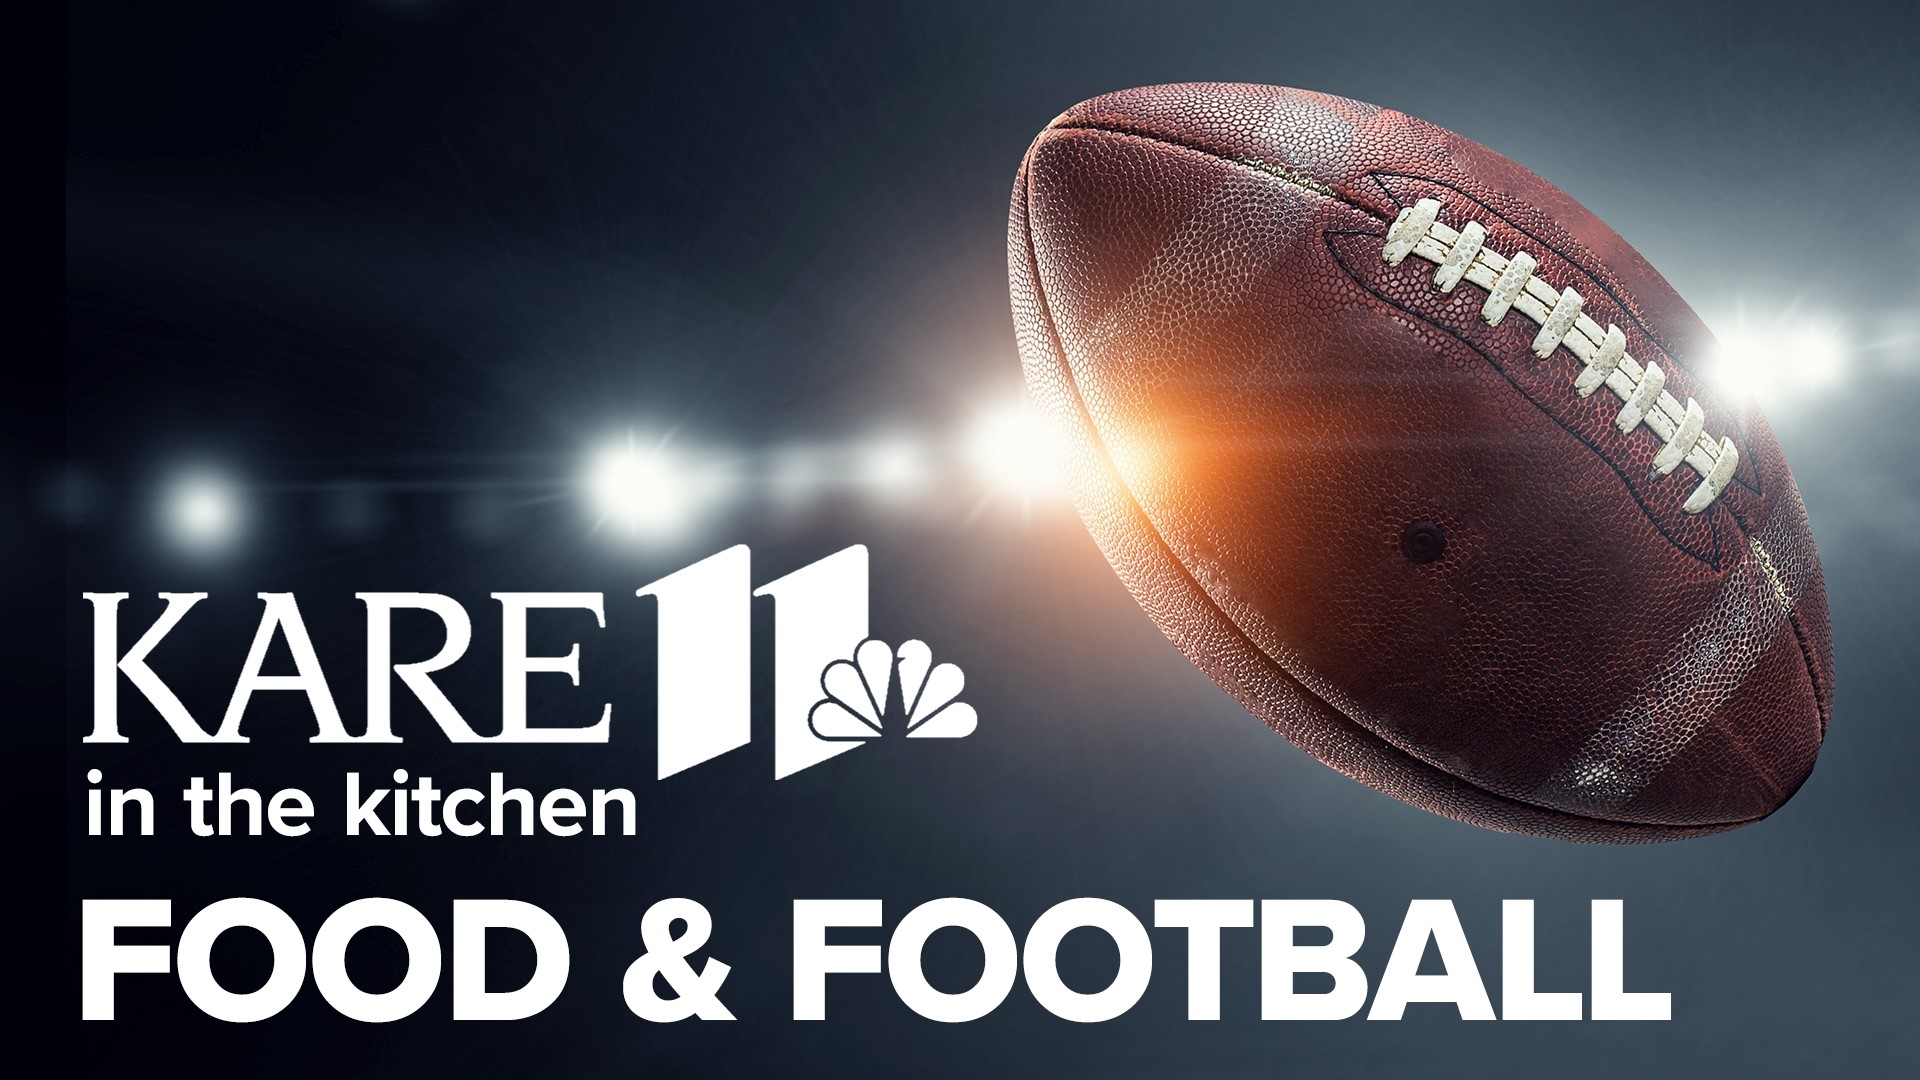 KARE 11's Alicia Lewis shares some favorite recipe ideas to share for the big game.